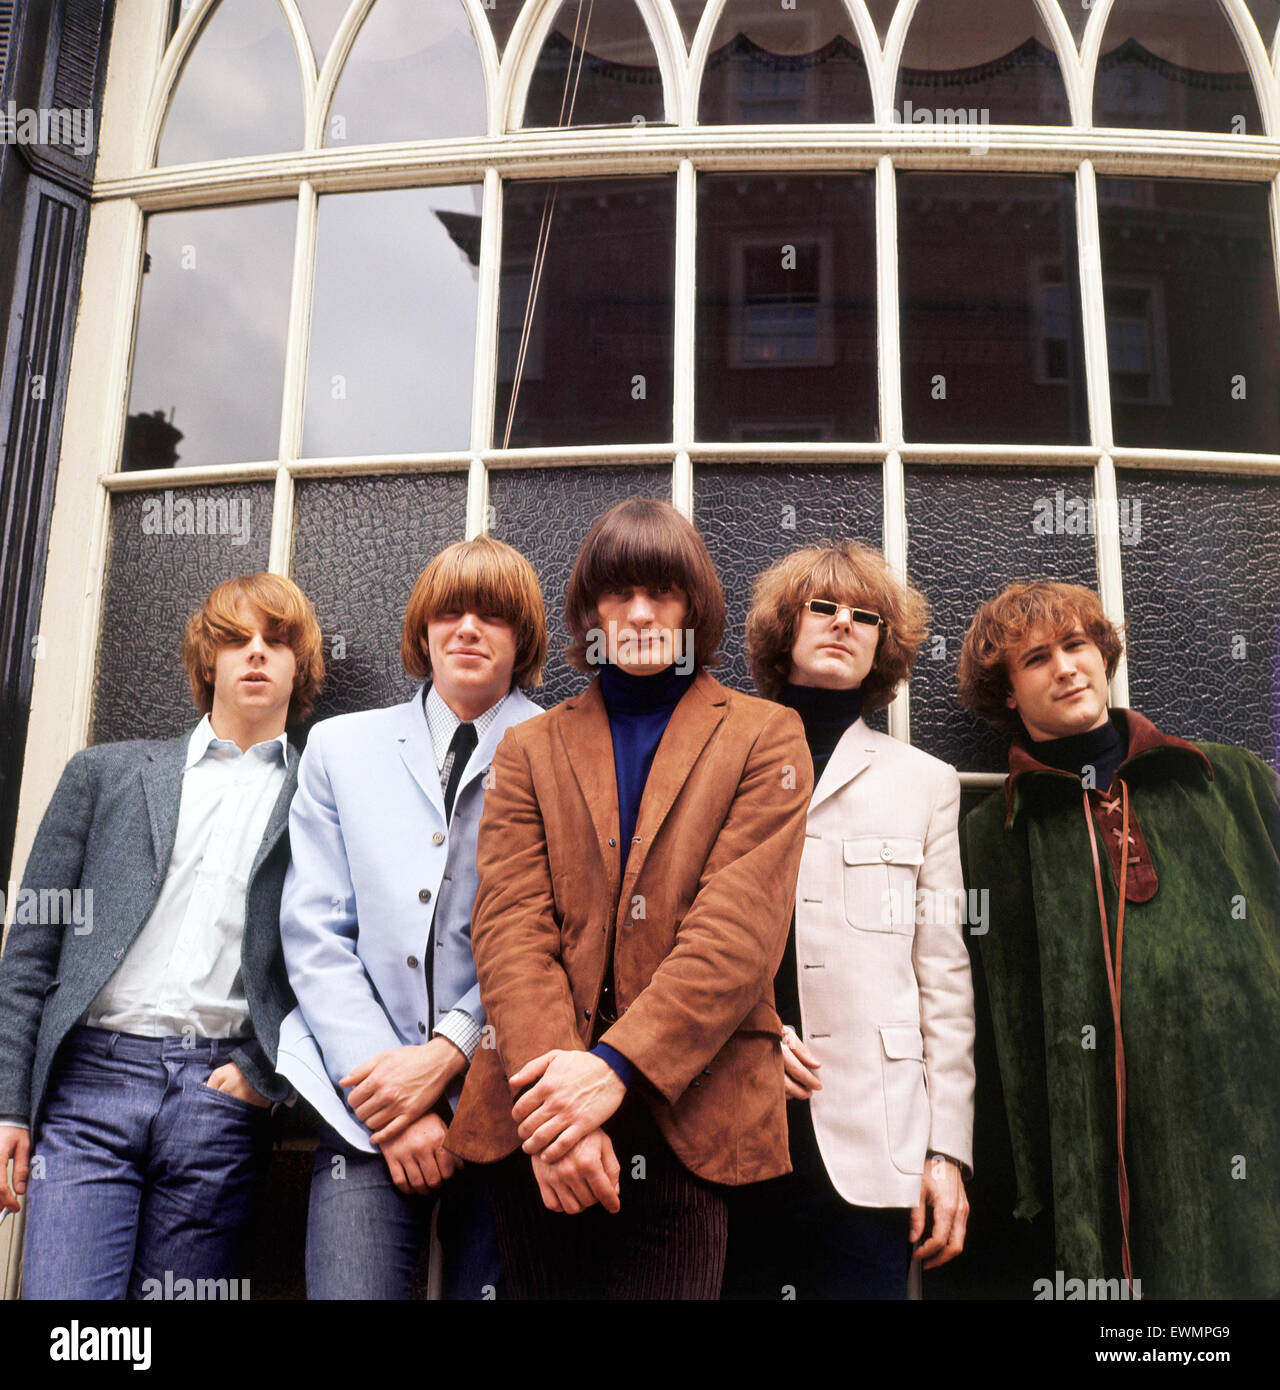 THE BYRDS  US group in 1965 from left: Chris Hillman, Michael Clarke, Gene Clarke, Roger McGuinn, David Crosby. Photo : Tony Gale Stock Photo